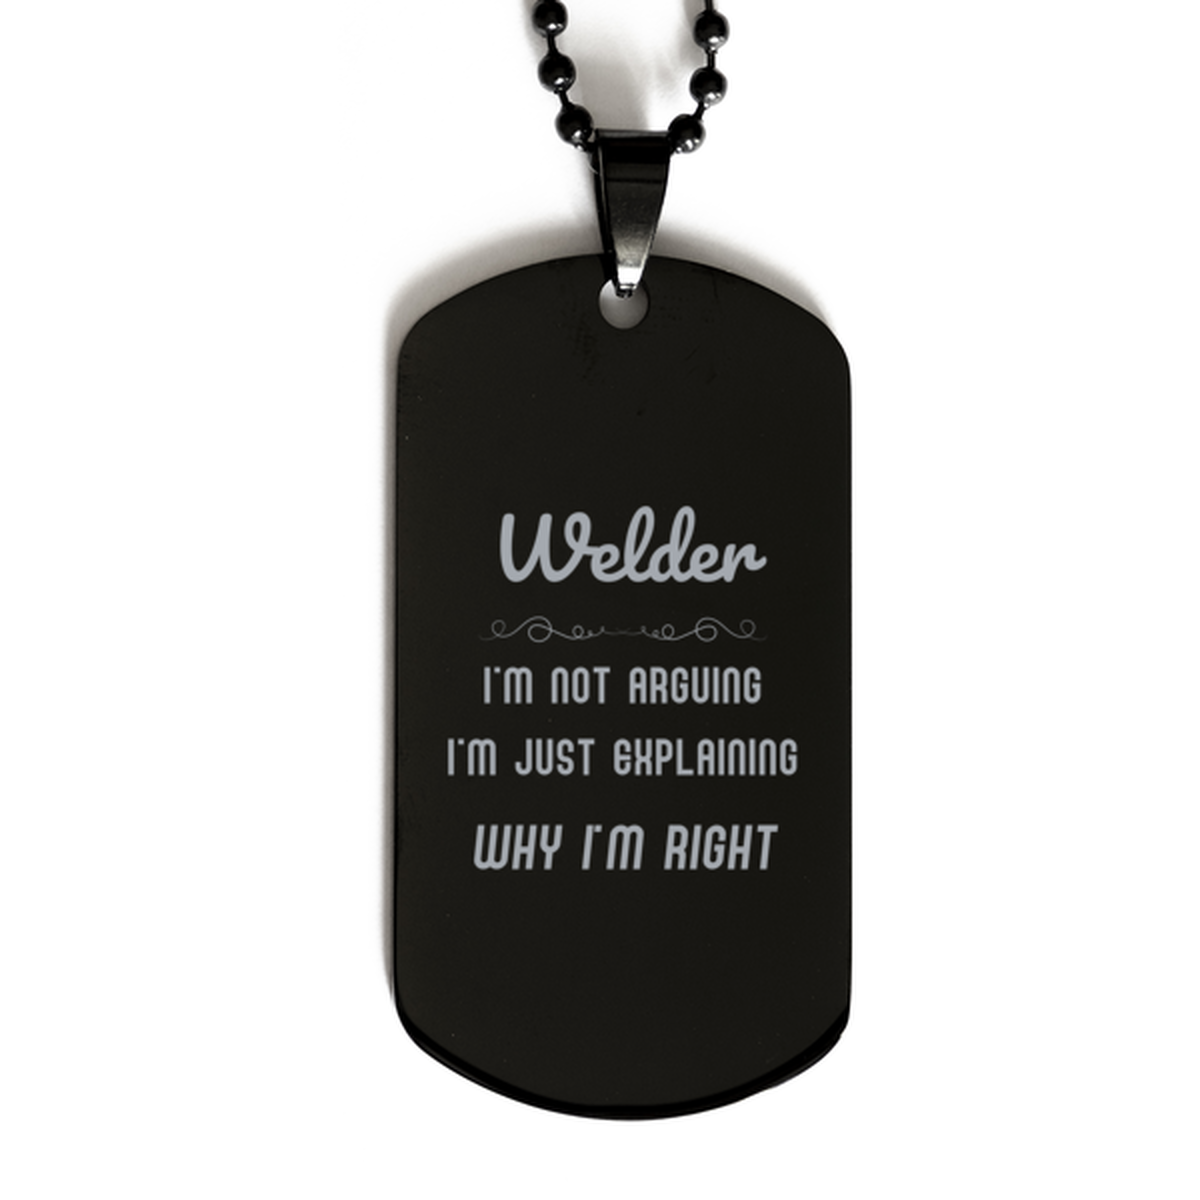 Welder I'm not Arguing. I'm Just Explaining Why I'm RIGHT Black Dog Tag, Funny Saying Quote Welder Gifts For Welder Graduation Birthday Christmas Gifts for Men Women Coworker